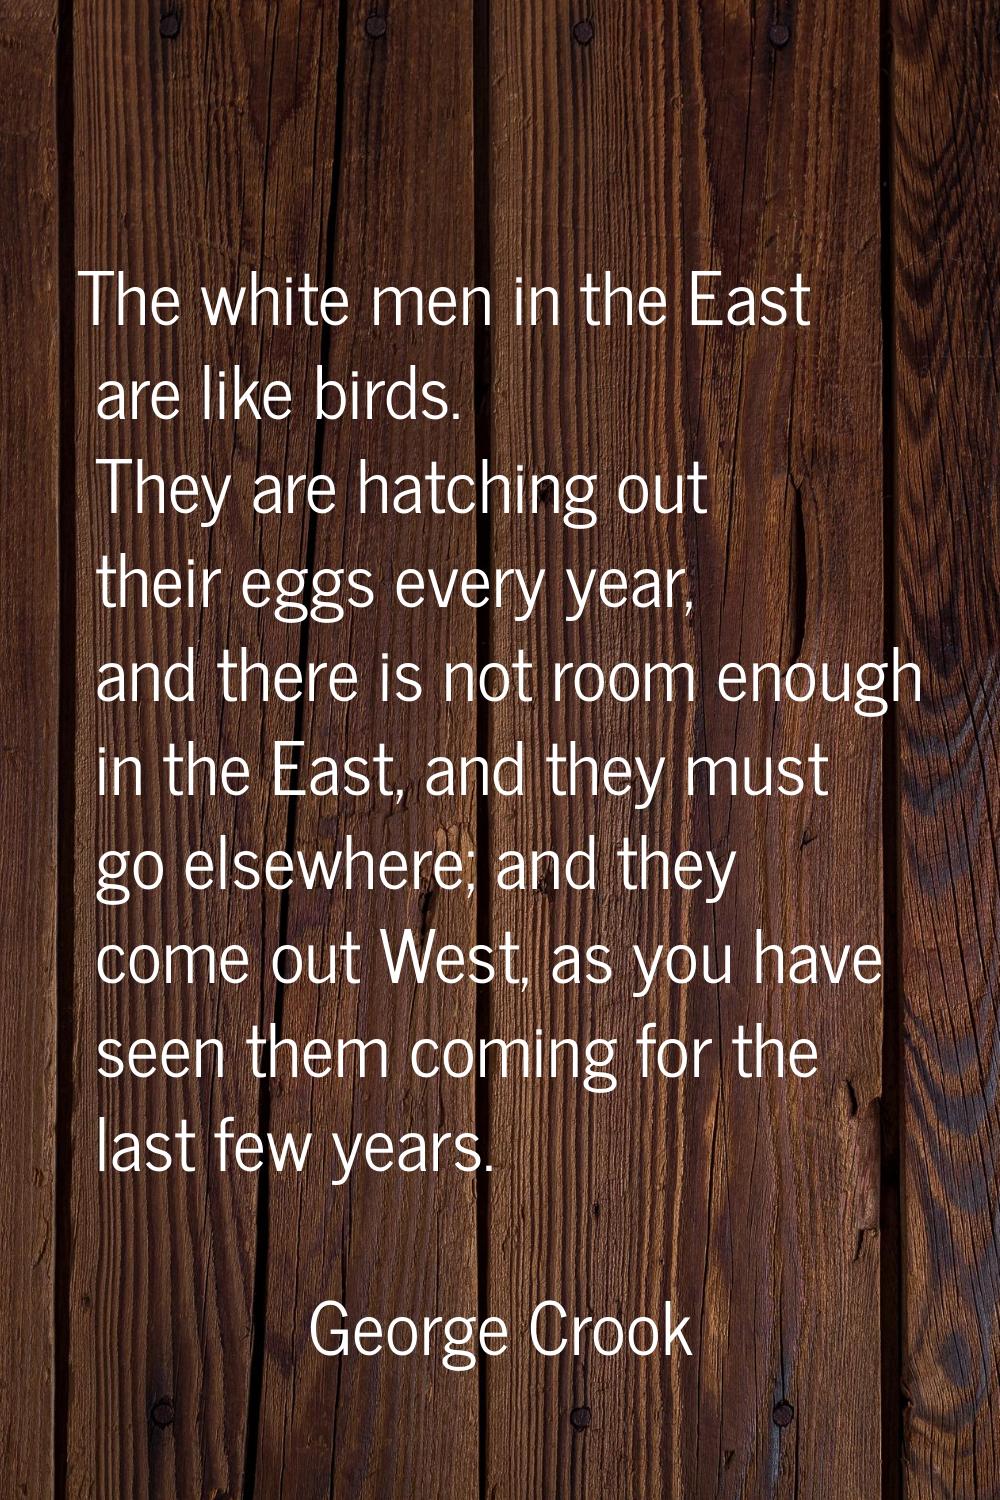 The white men in the East are like birds. They are hatching out their eggs every year, and there is